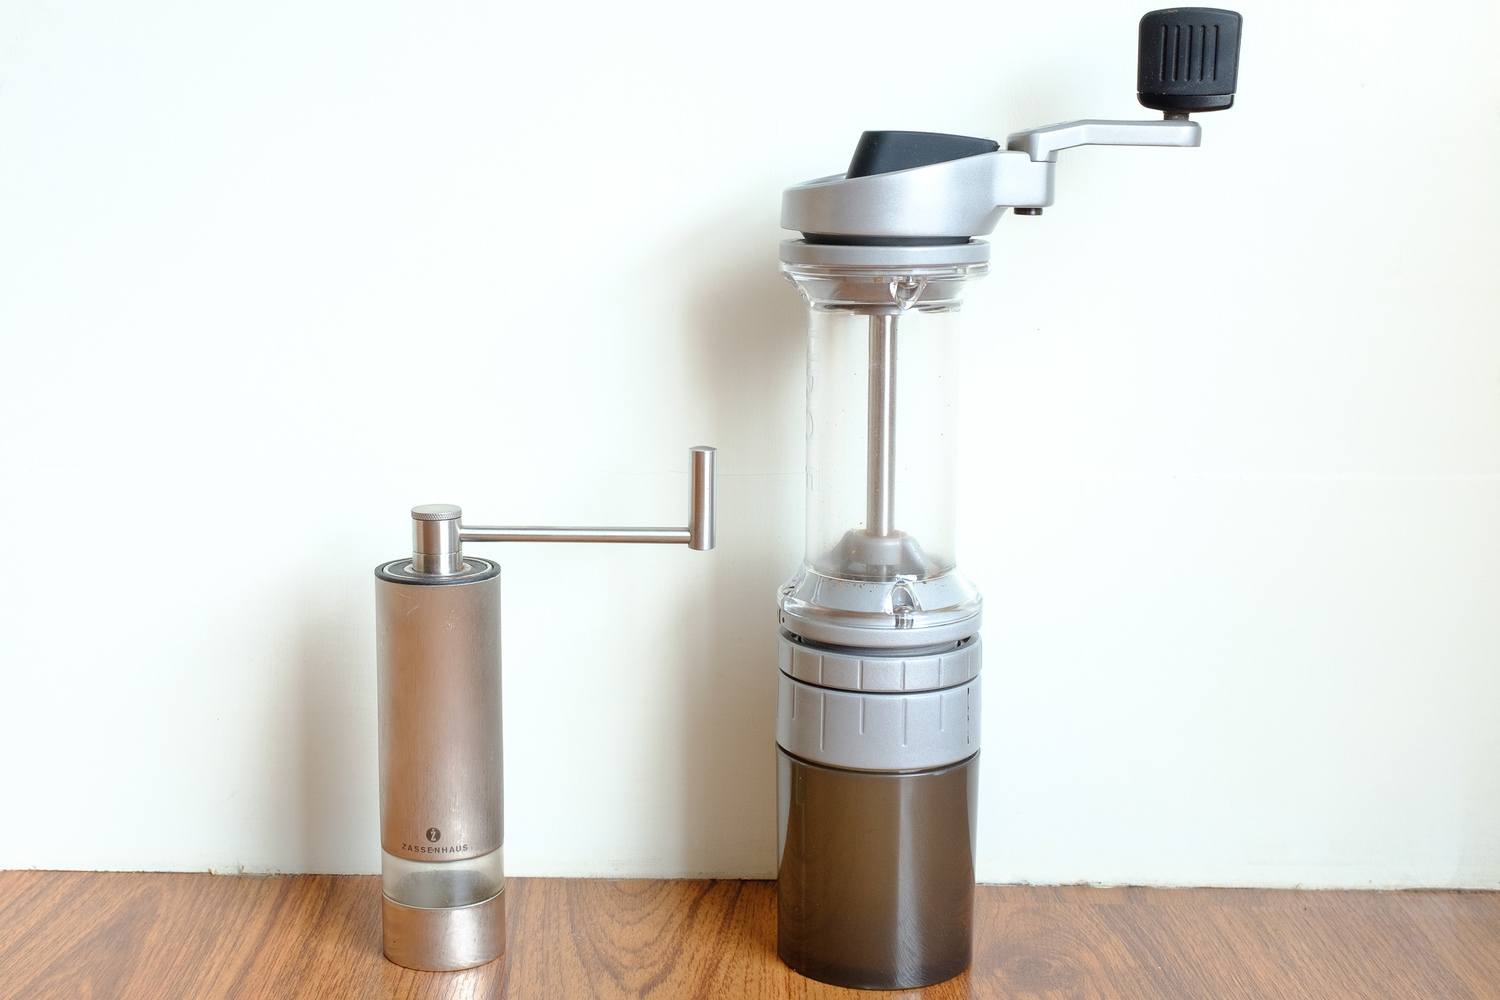 Do I Really Need A Home Coffee Grinder – Clive Coffee